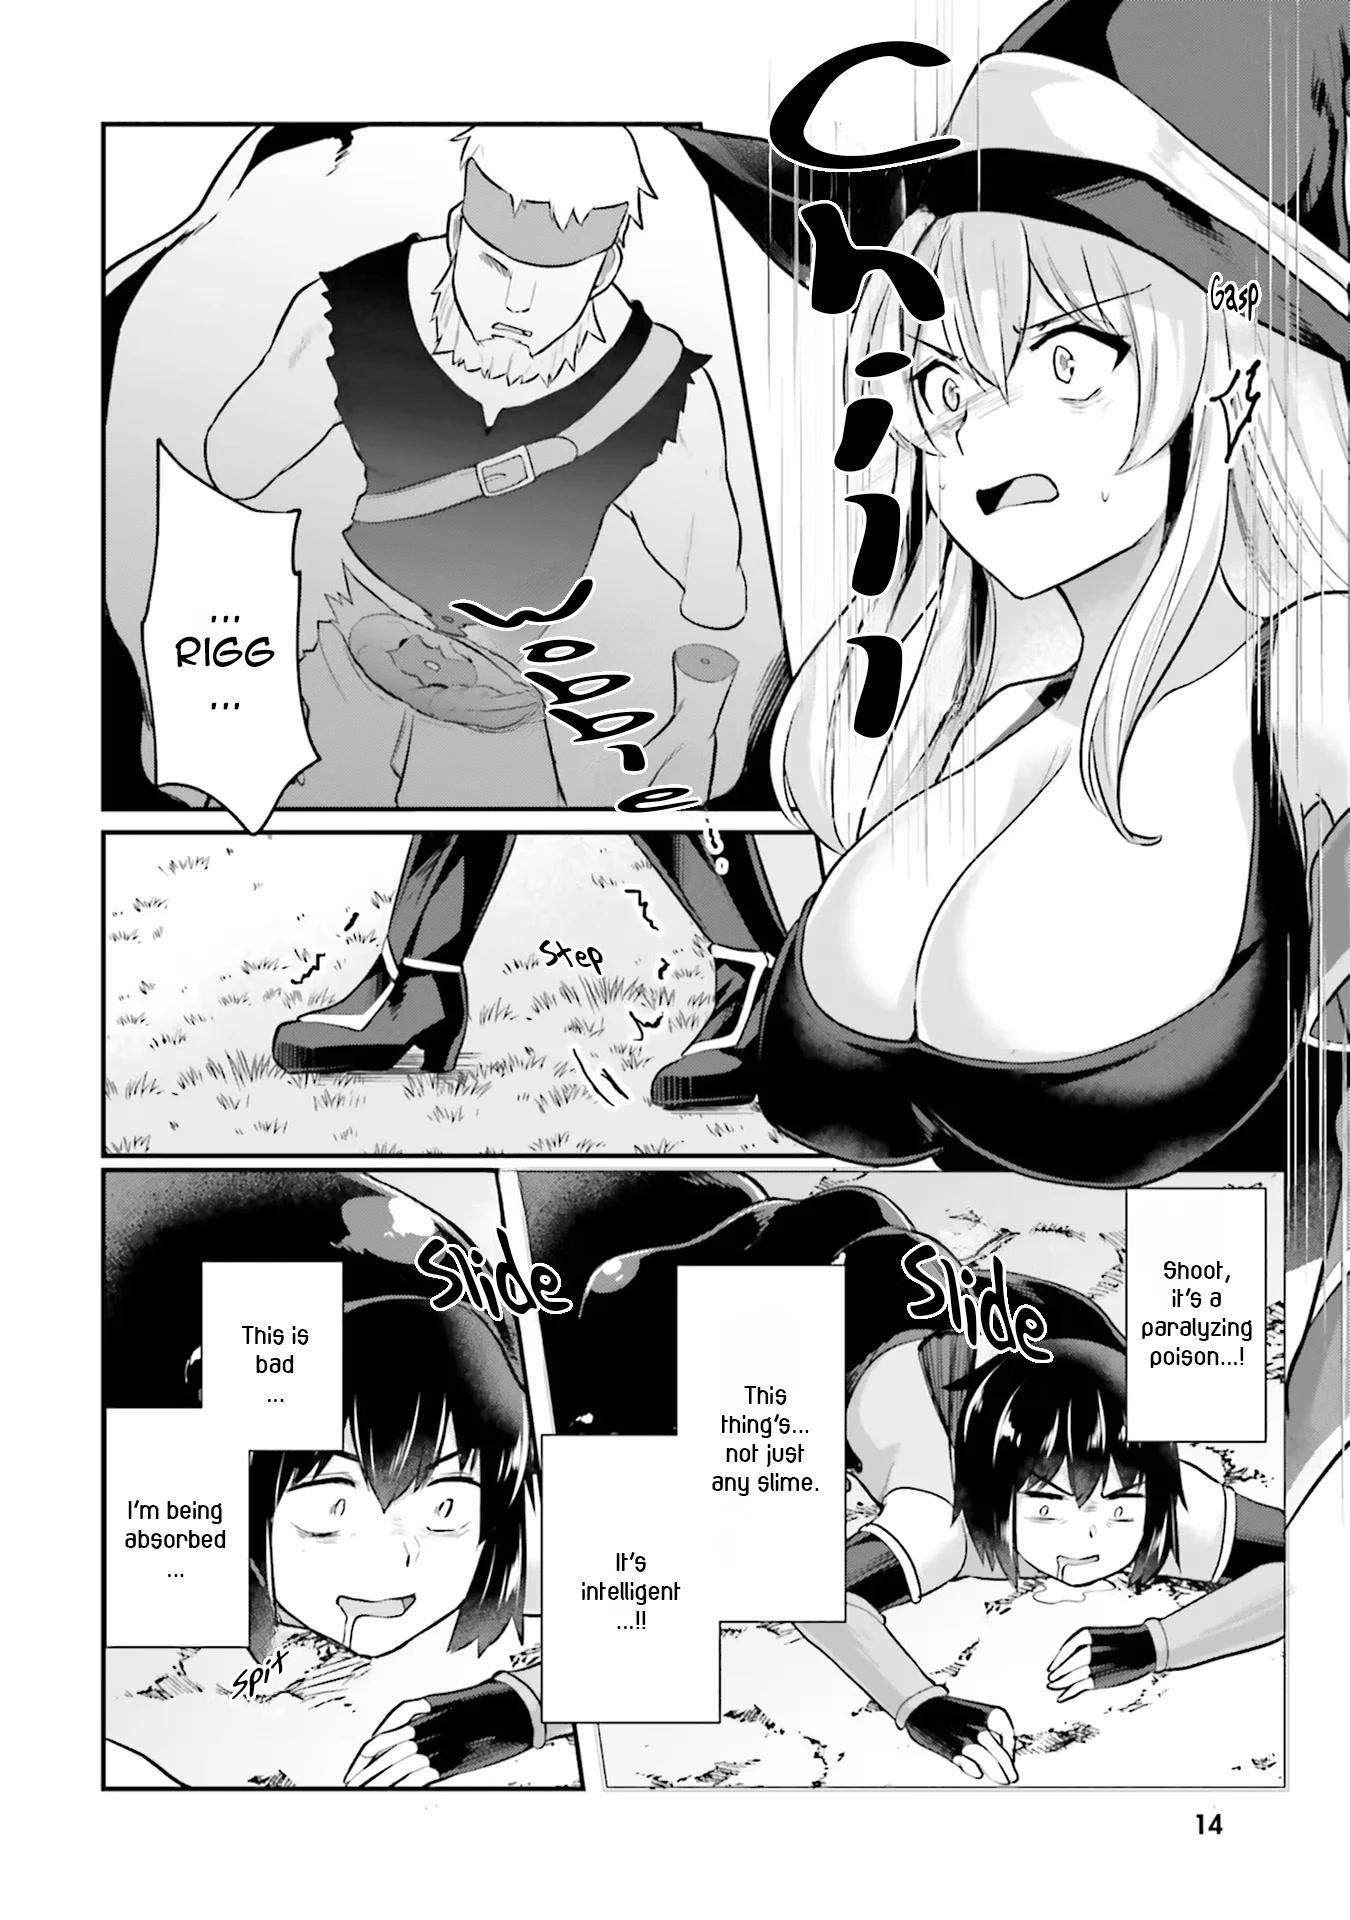 Inside the cave of obscenity manga raw